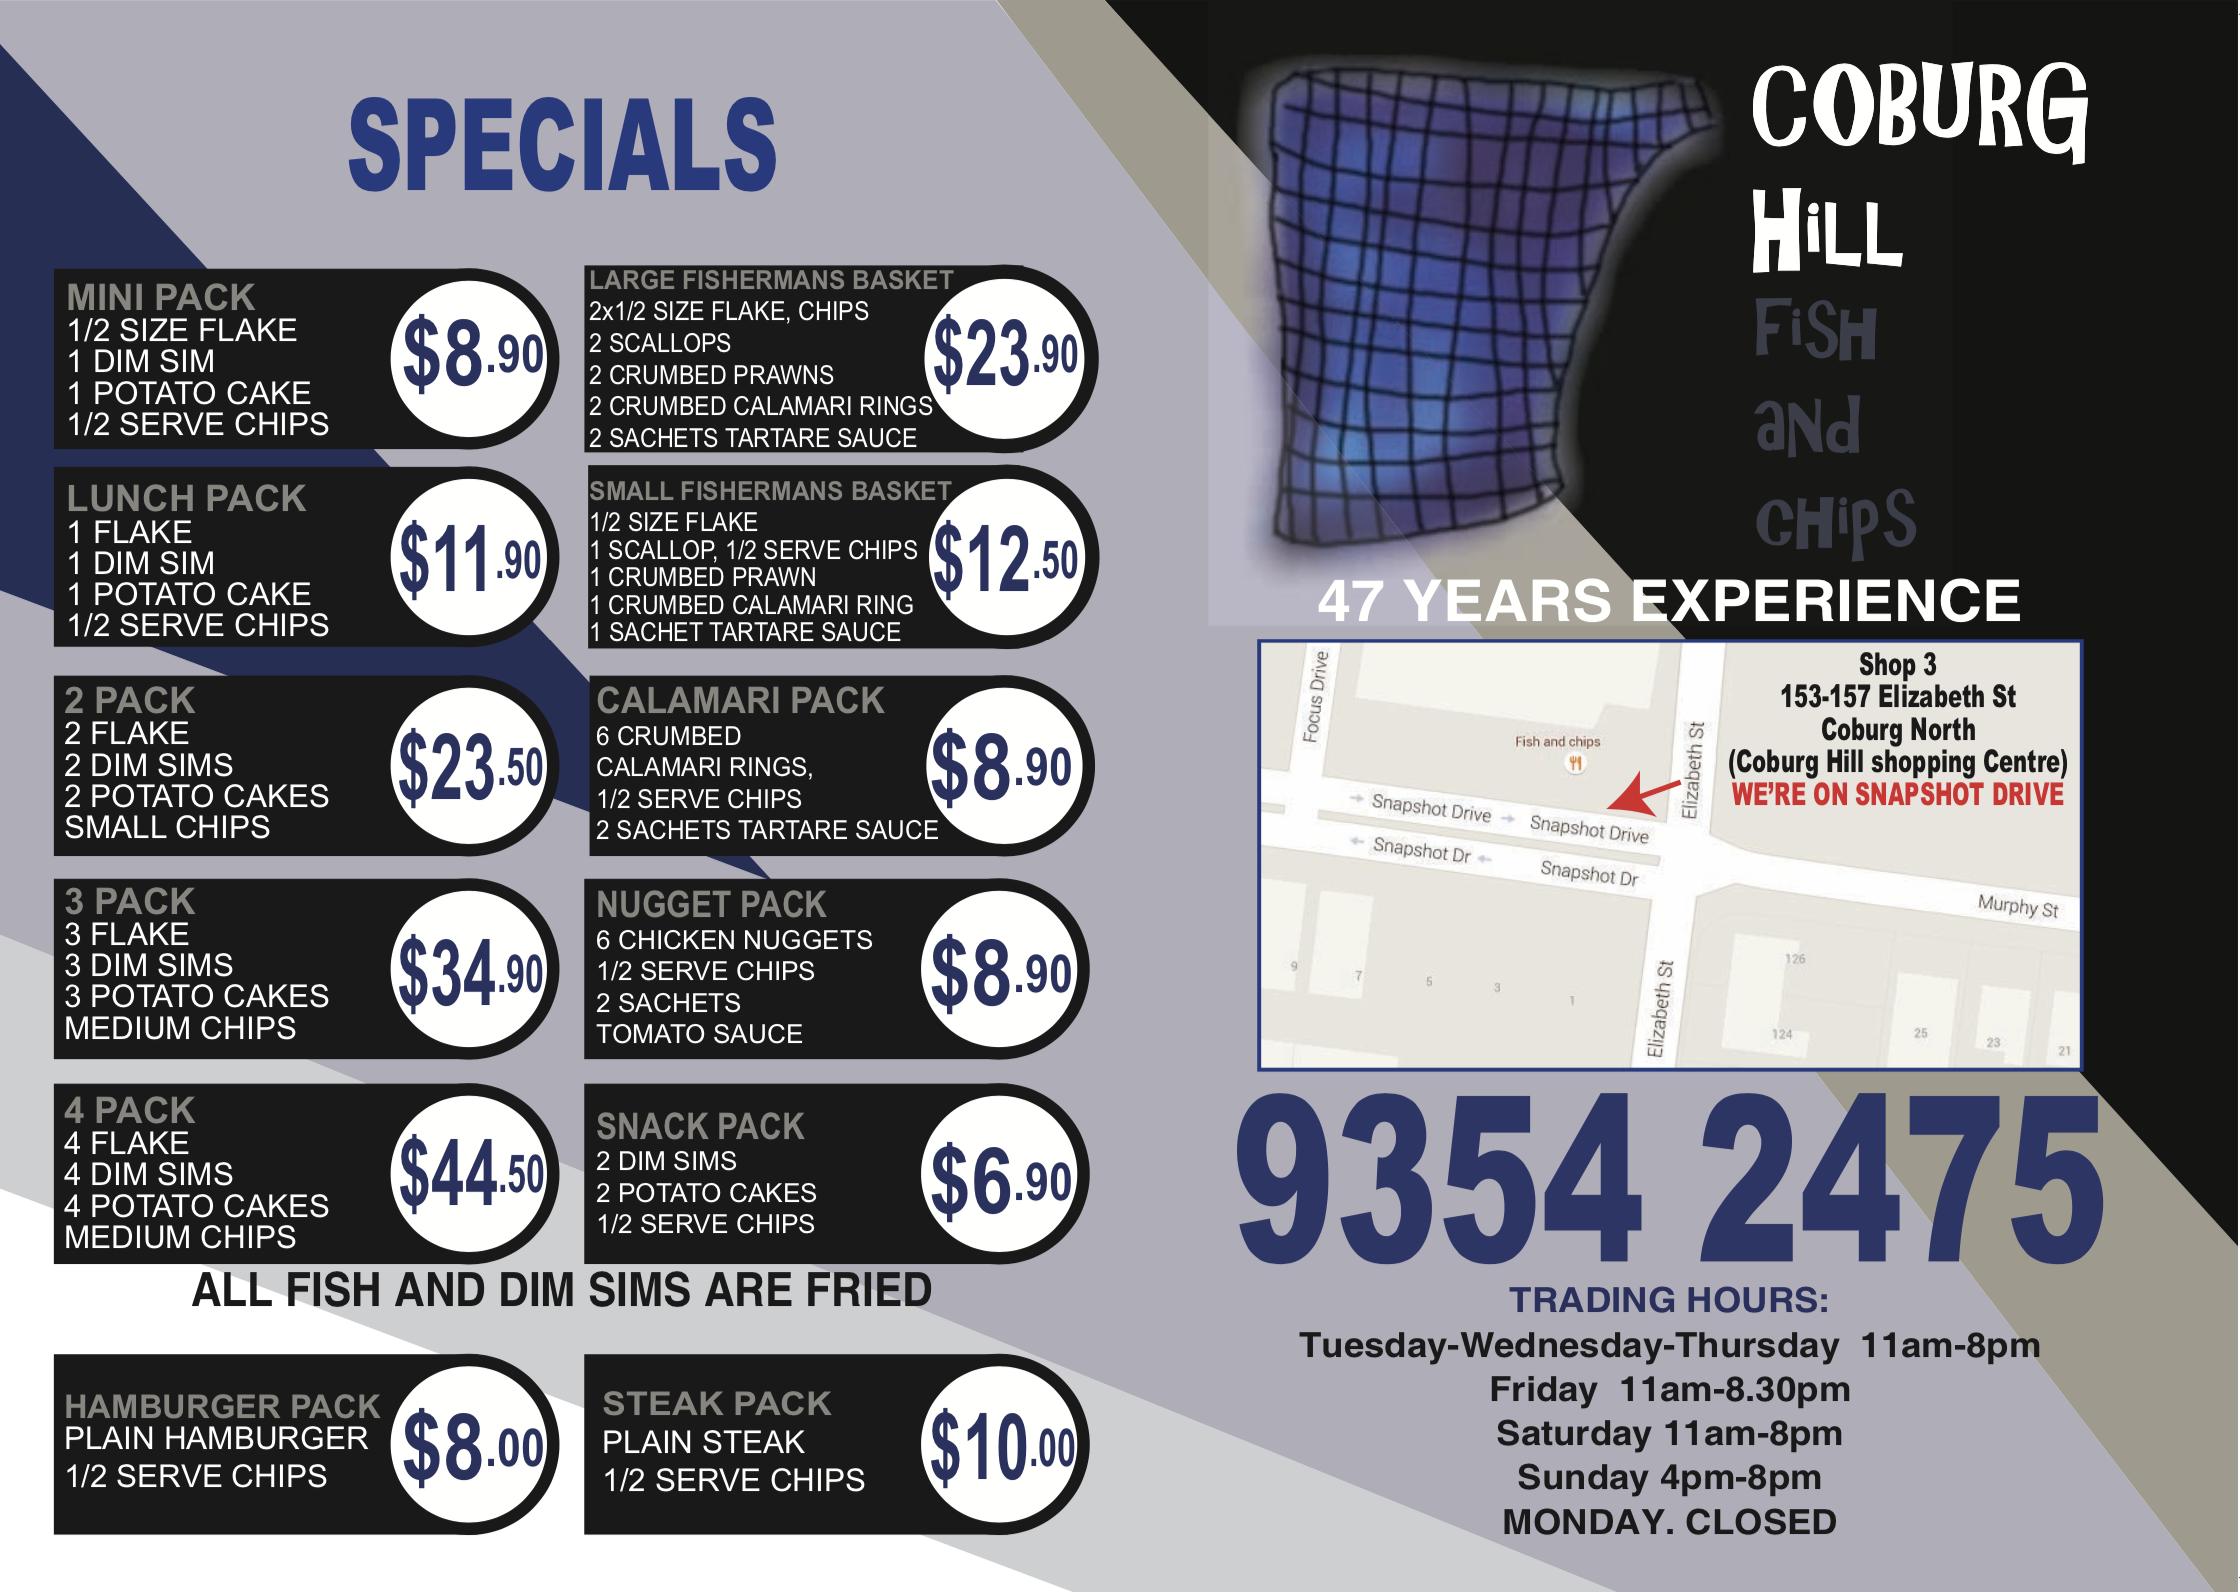 Coburg Hill Fish and Chips | meal takeaway | 4 Snapshot Dr, Coburg North VIC 3058, Australia | 0393542475 OR +61 3 9354 2475